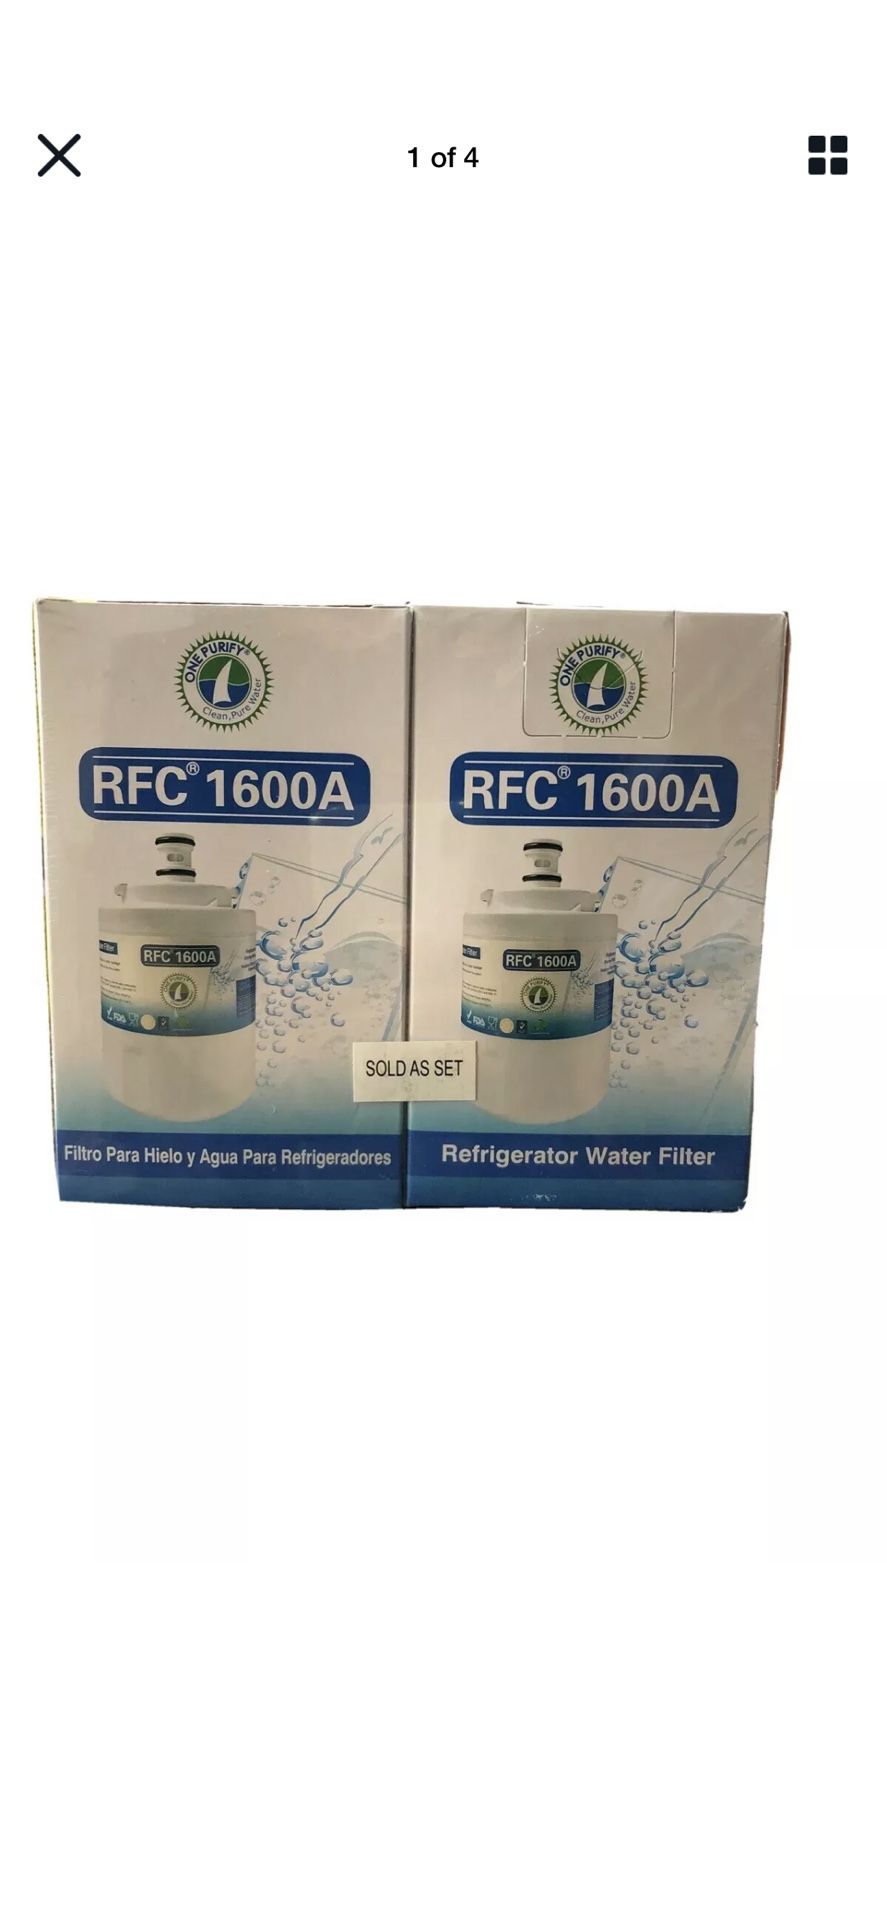 Refrigerator Water Filter RFC 1600A ONE PURIFY Twin Pack Whirlpool Samsung Maytag etc. Condition is New.